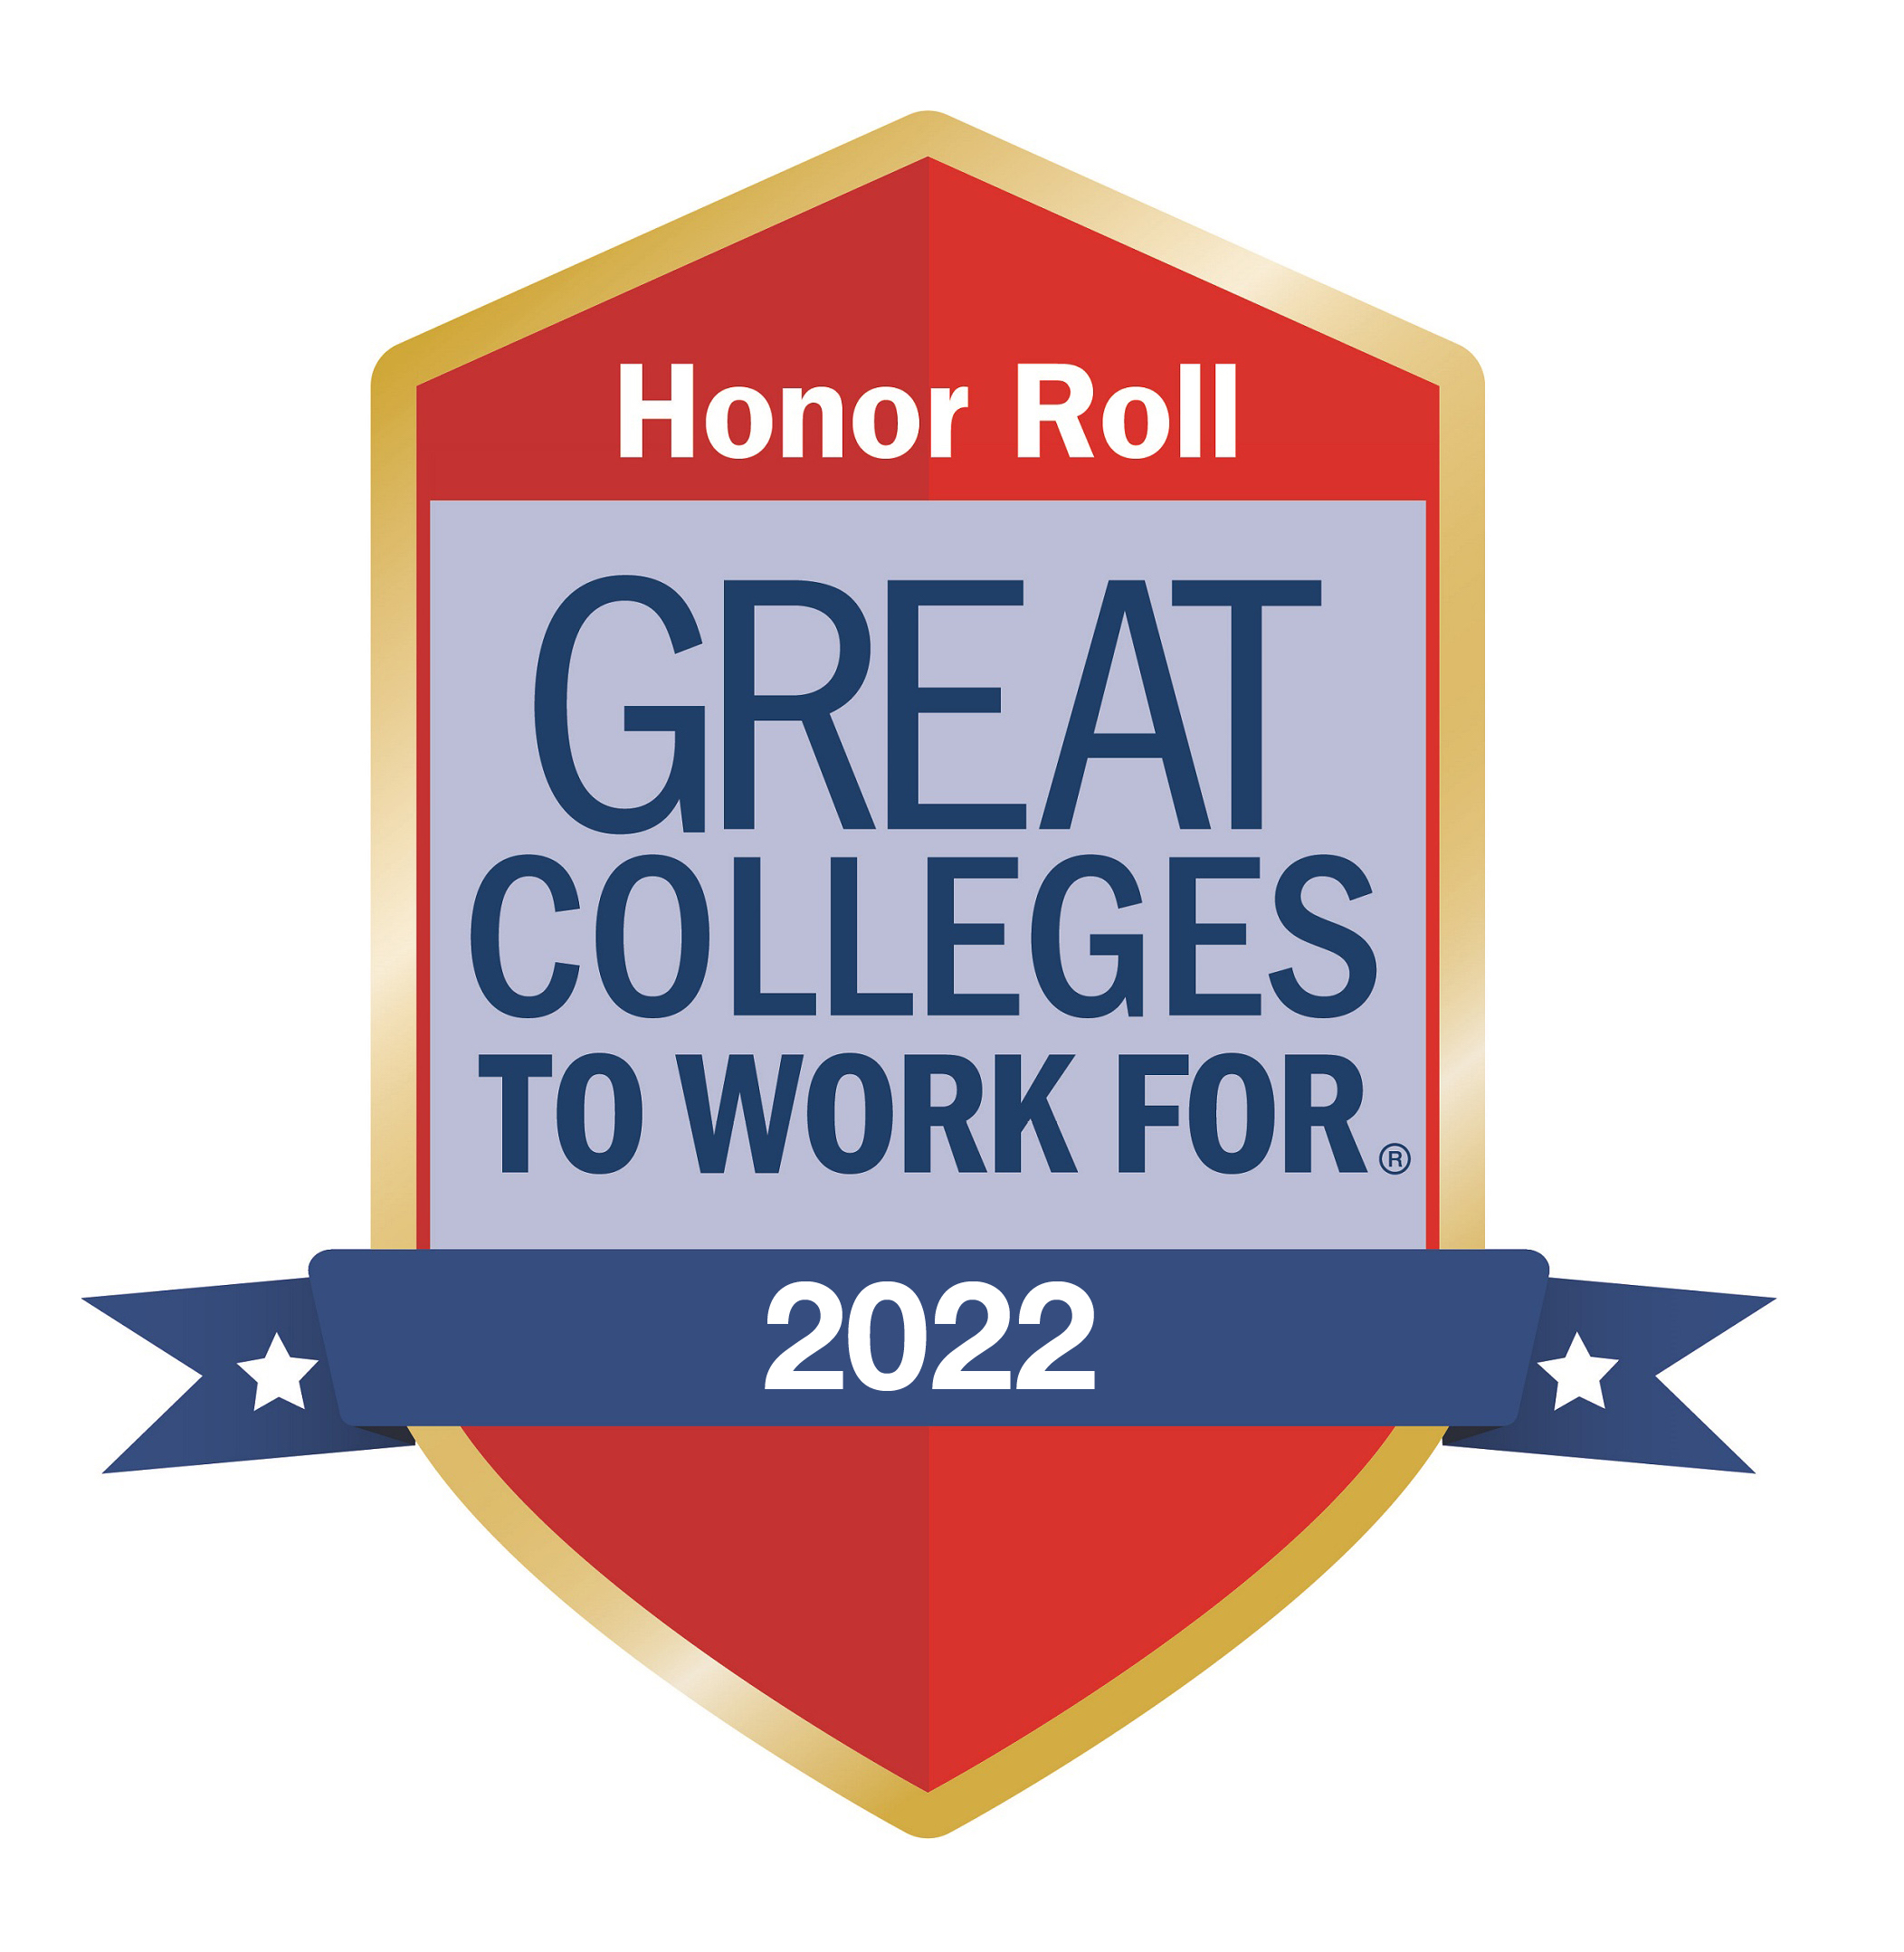 Great College to Work For Honor Roll logo